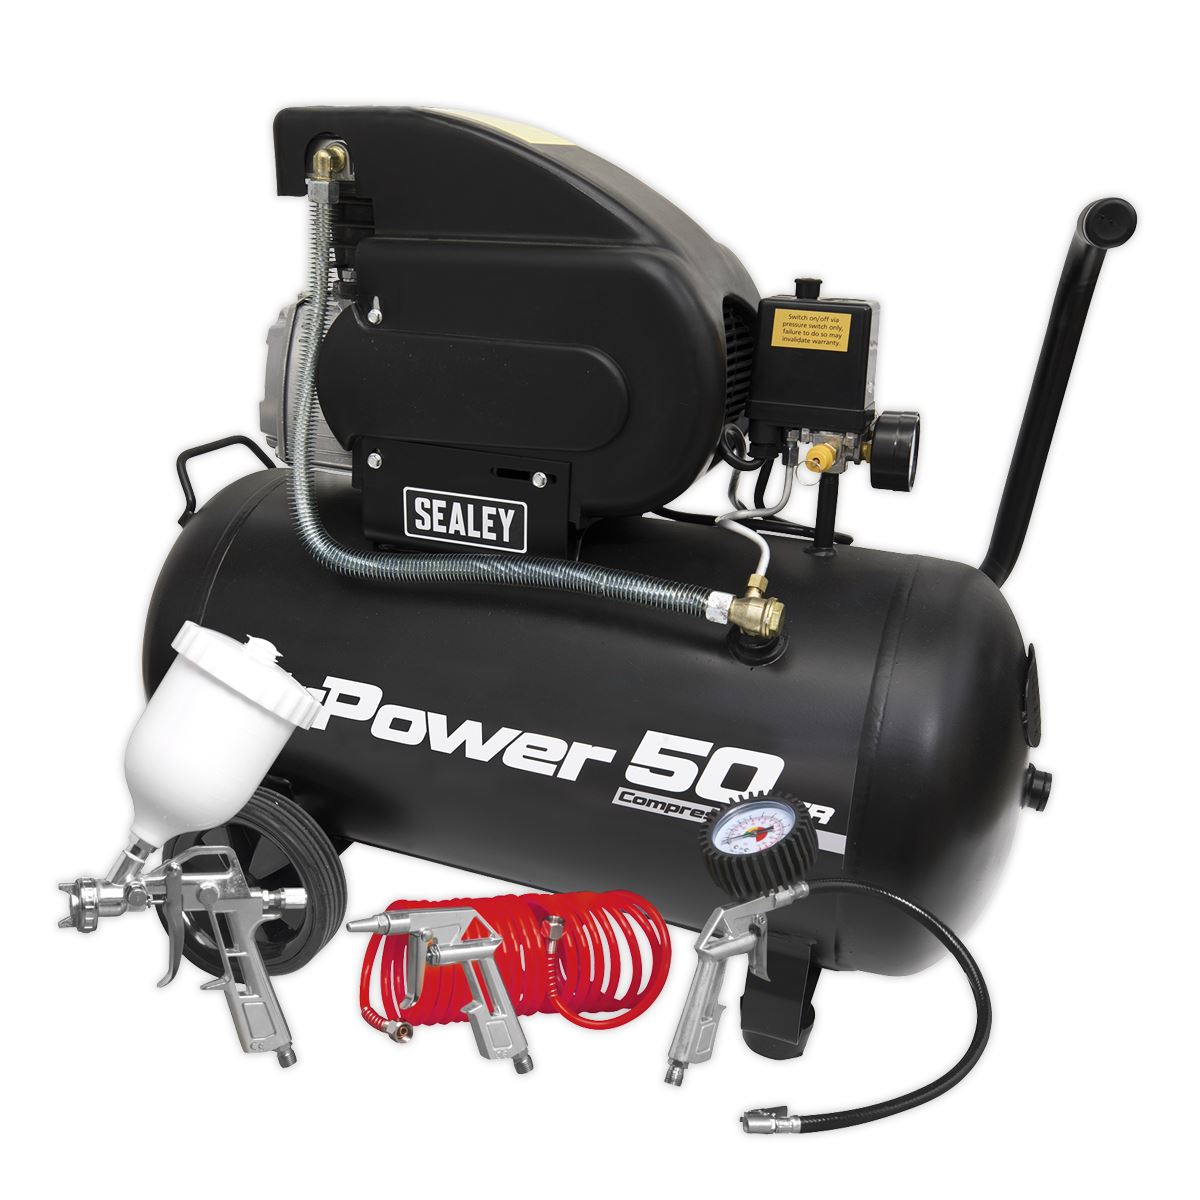 Sealey Air Compressor 50L Direct Drive 2hp with 4pc Air Accessory Kit